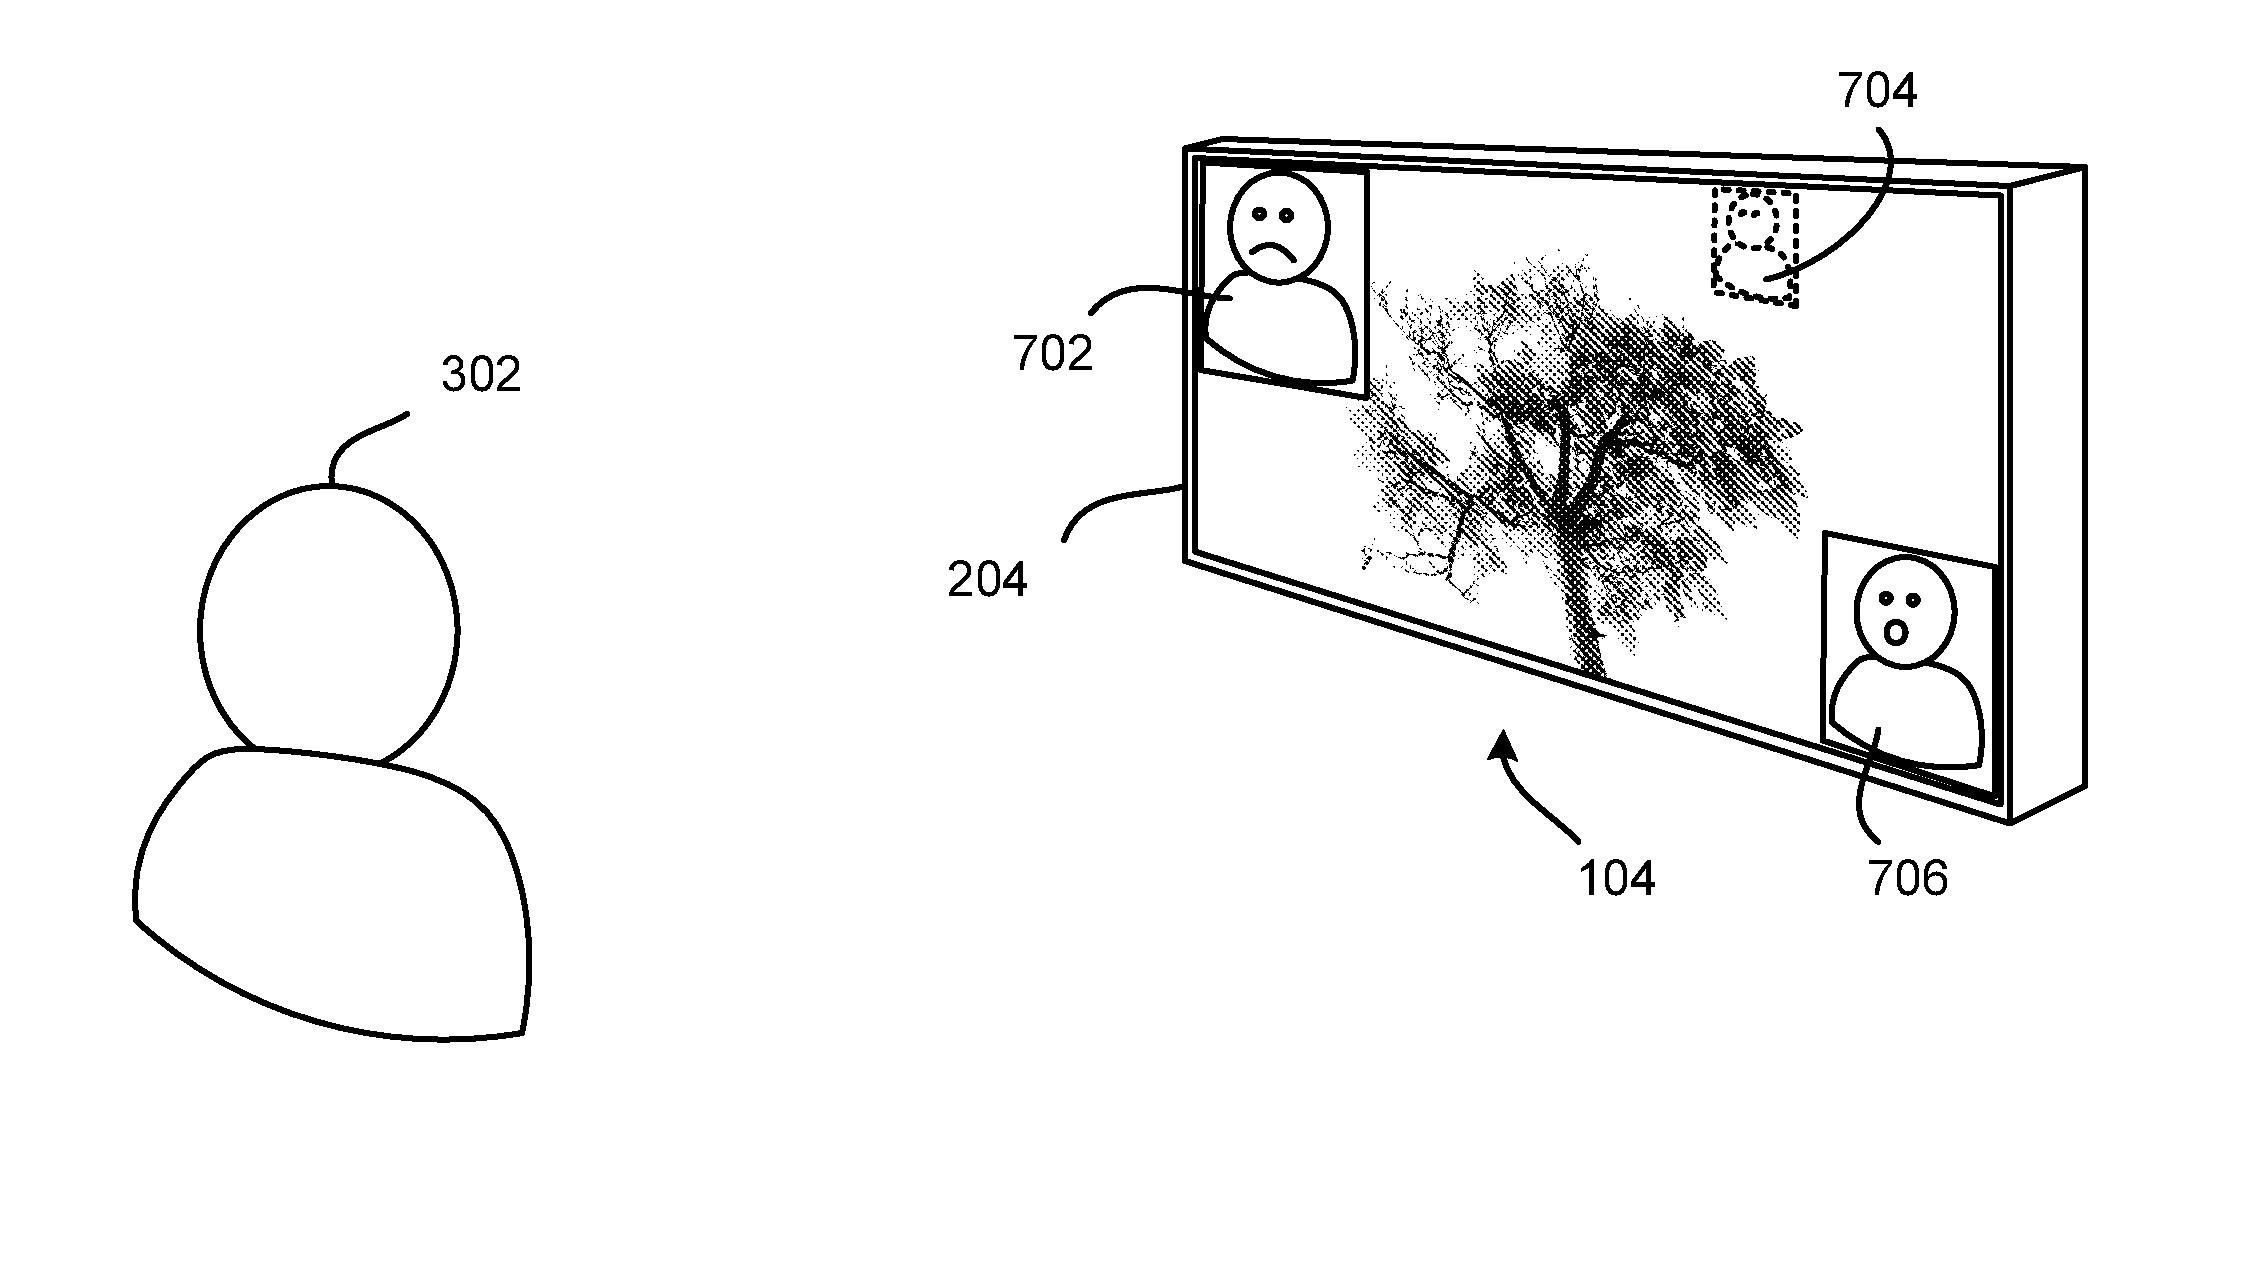 Apparatus, system, and method for providing social content